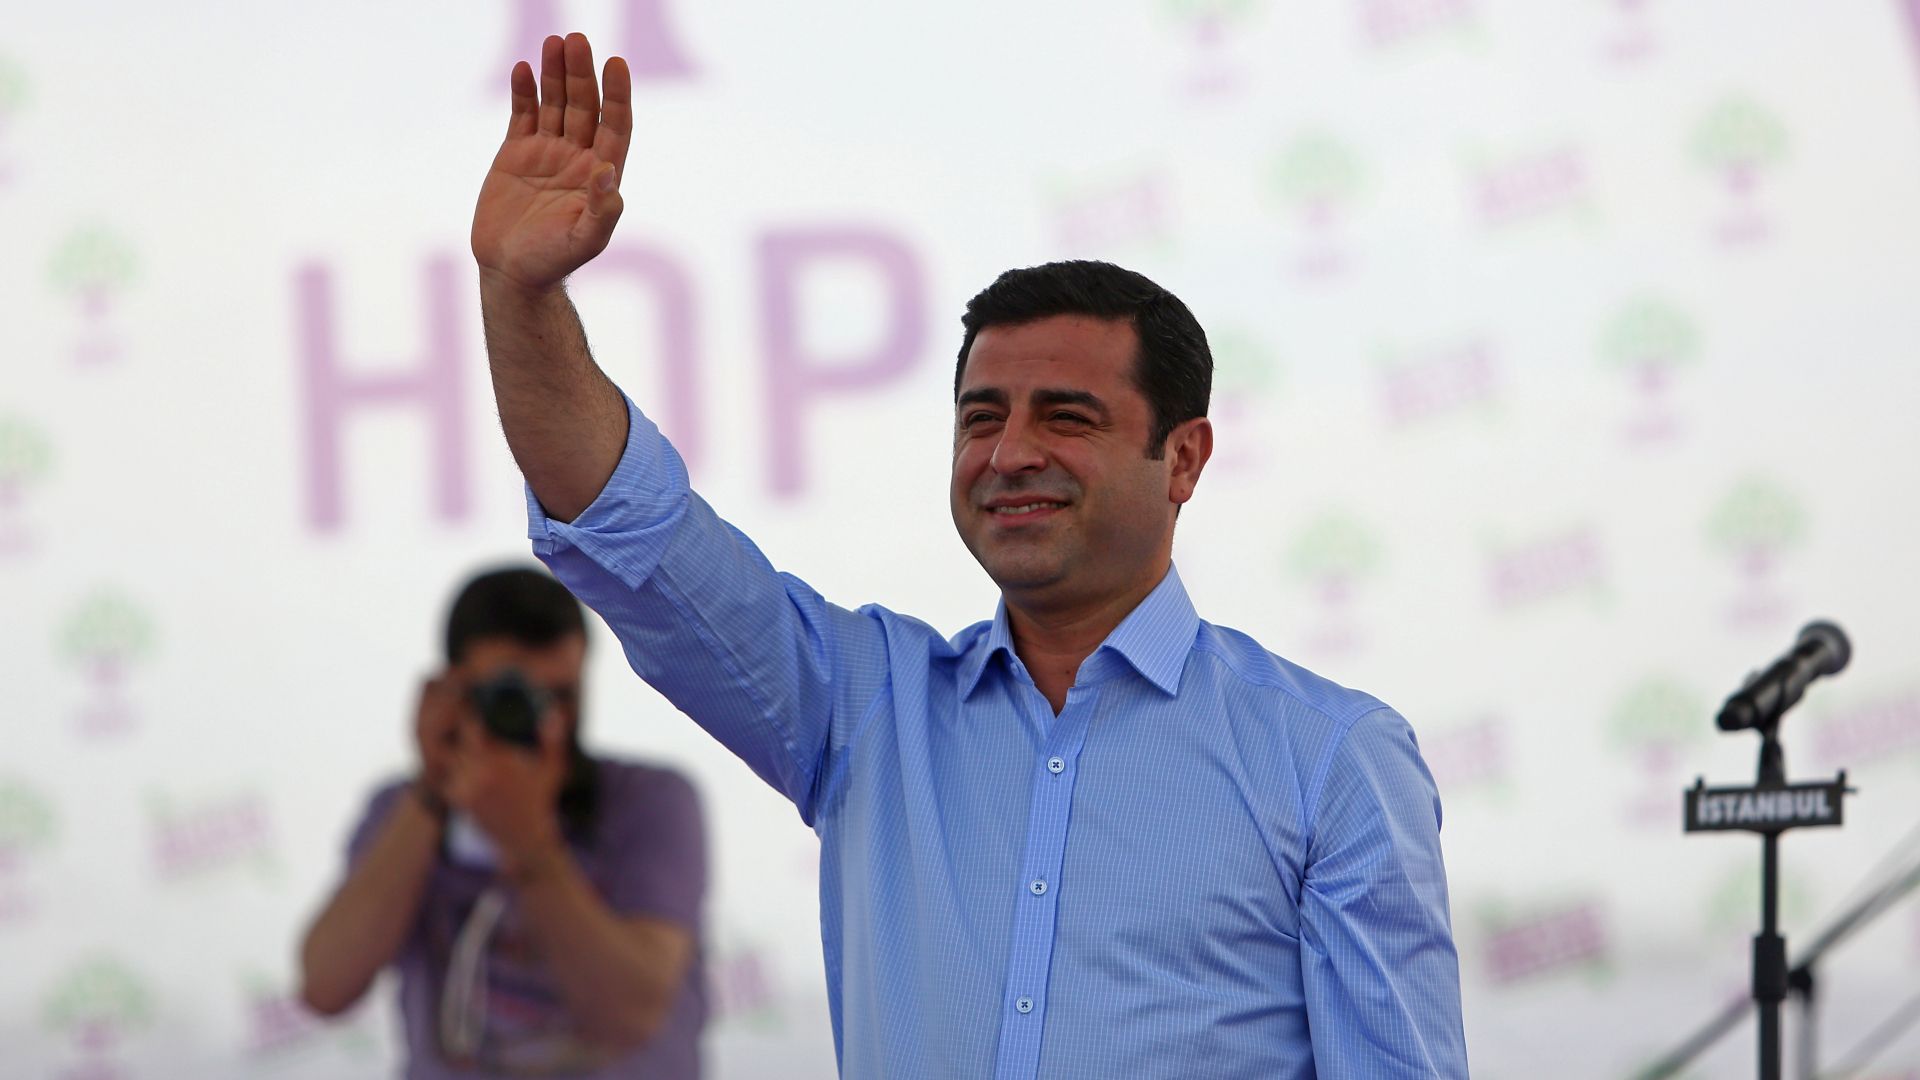 Former HDP co-chair Selahattin Demirtaş greeting supporters in 2015